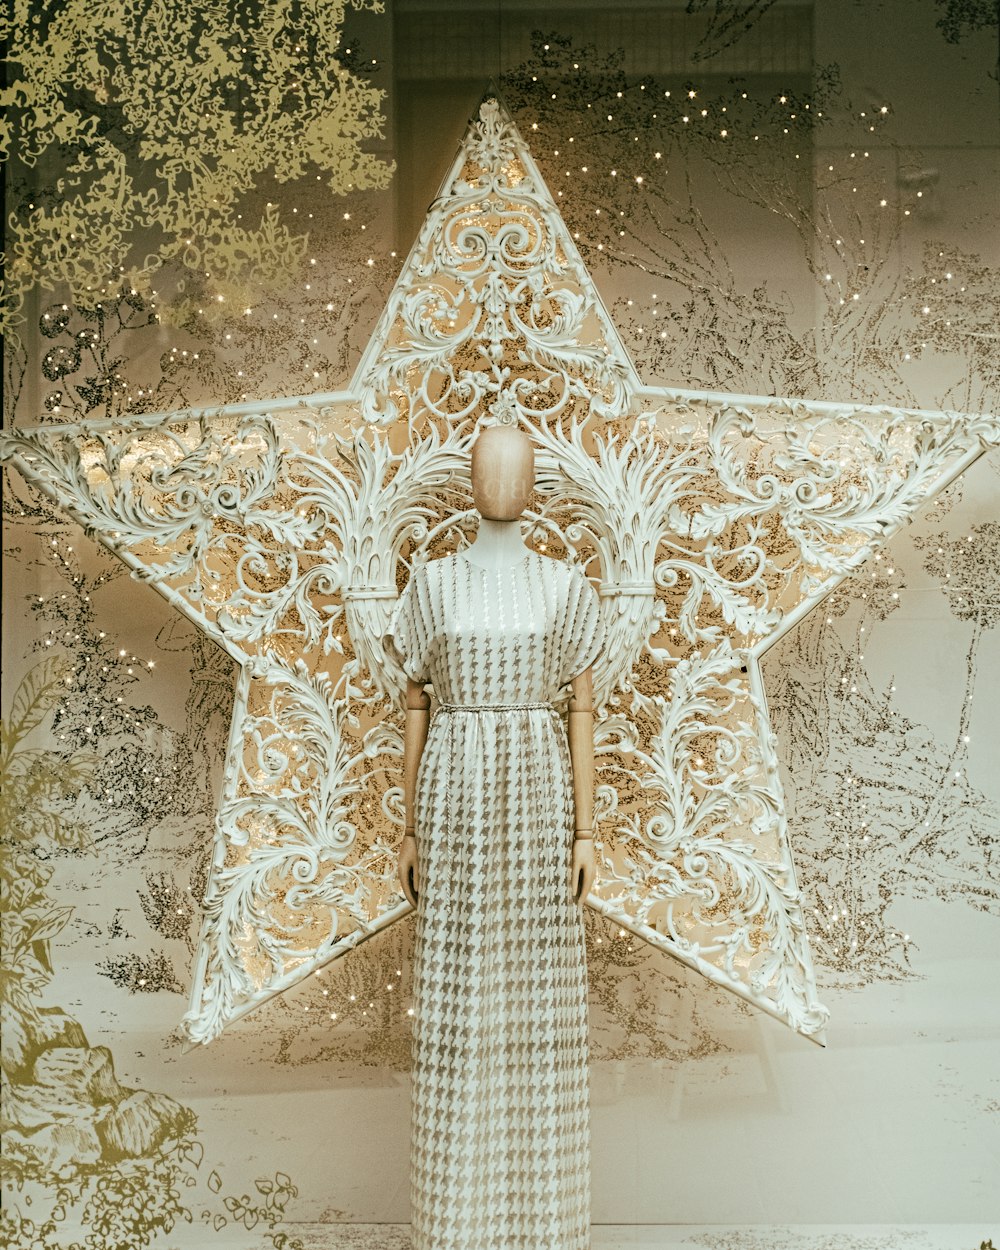 a mannequin dressed in a white dress standing in front of a star